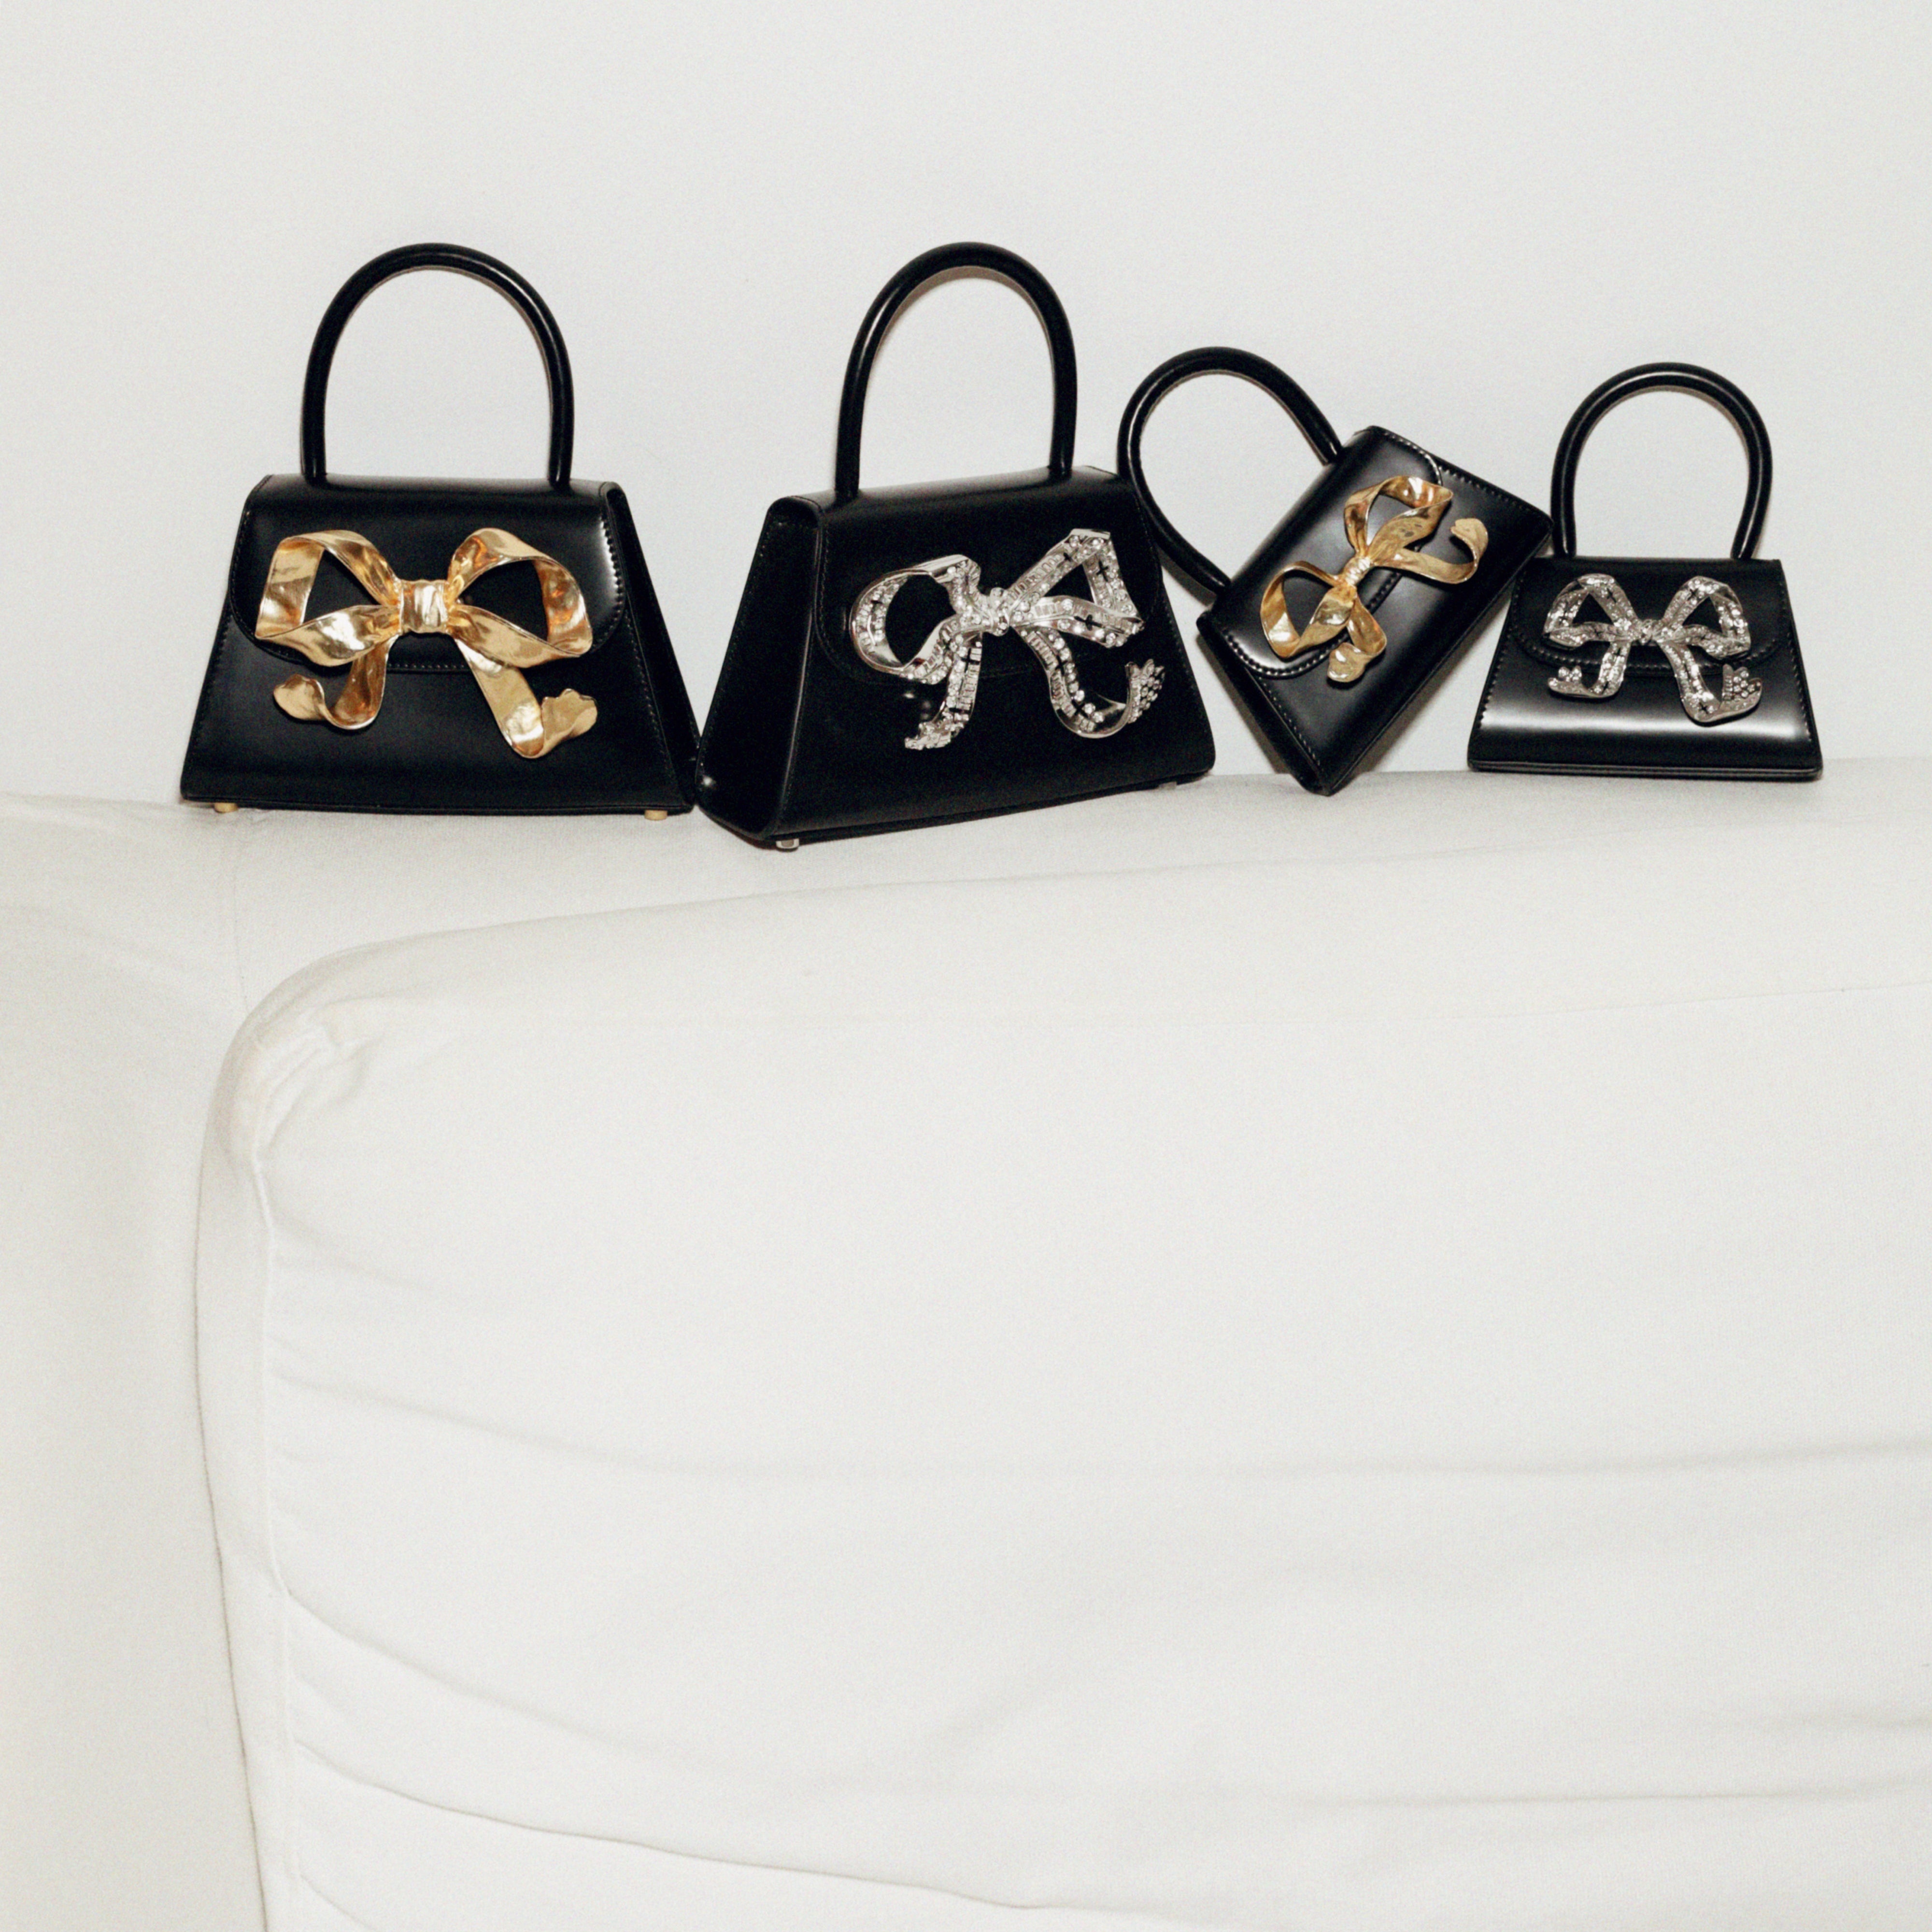 The Bow Mini in Black with Gold Hardware - 6